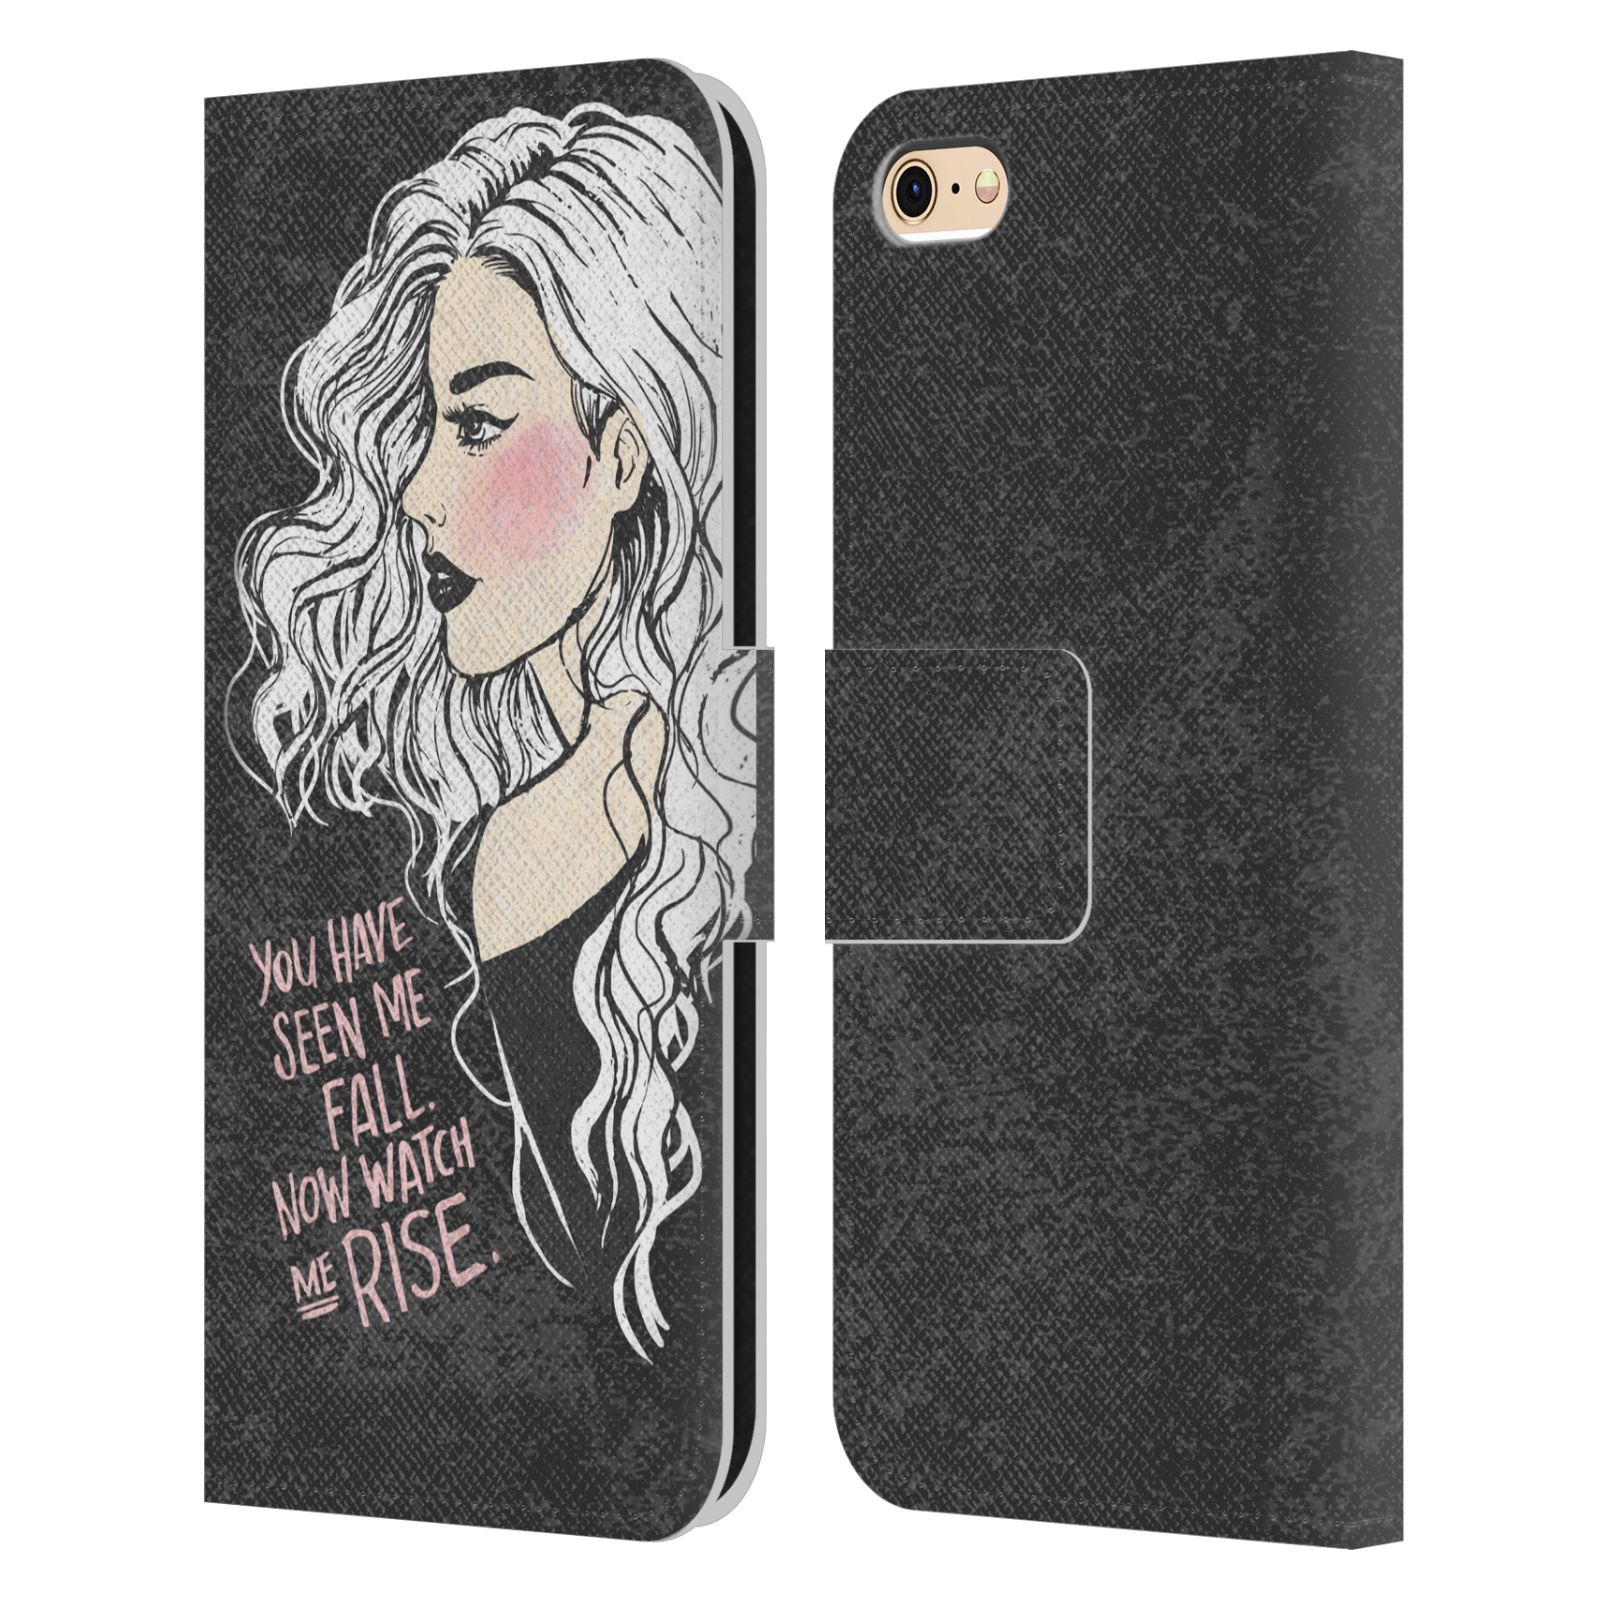 Pouzdro na mobil Apple Iphone 6 / 6S - HEAD CASE - Fall and Rise